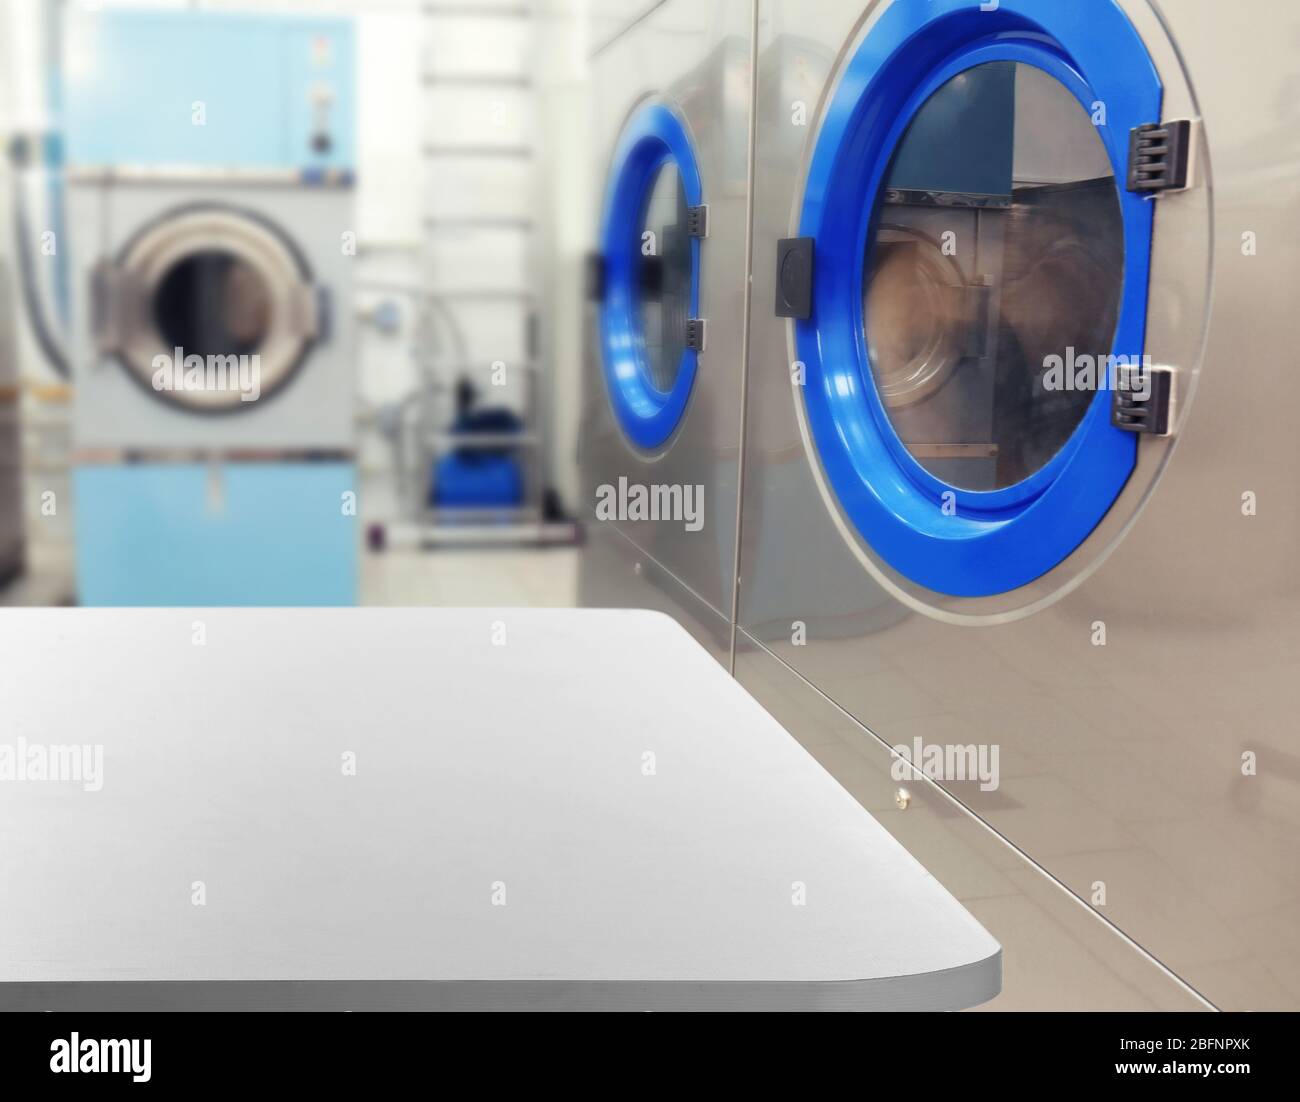 Table and washing machines at self-service laundry Stock Photo